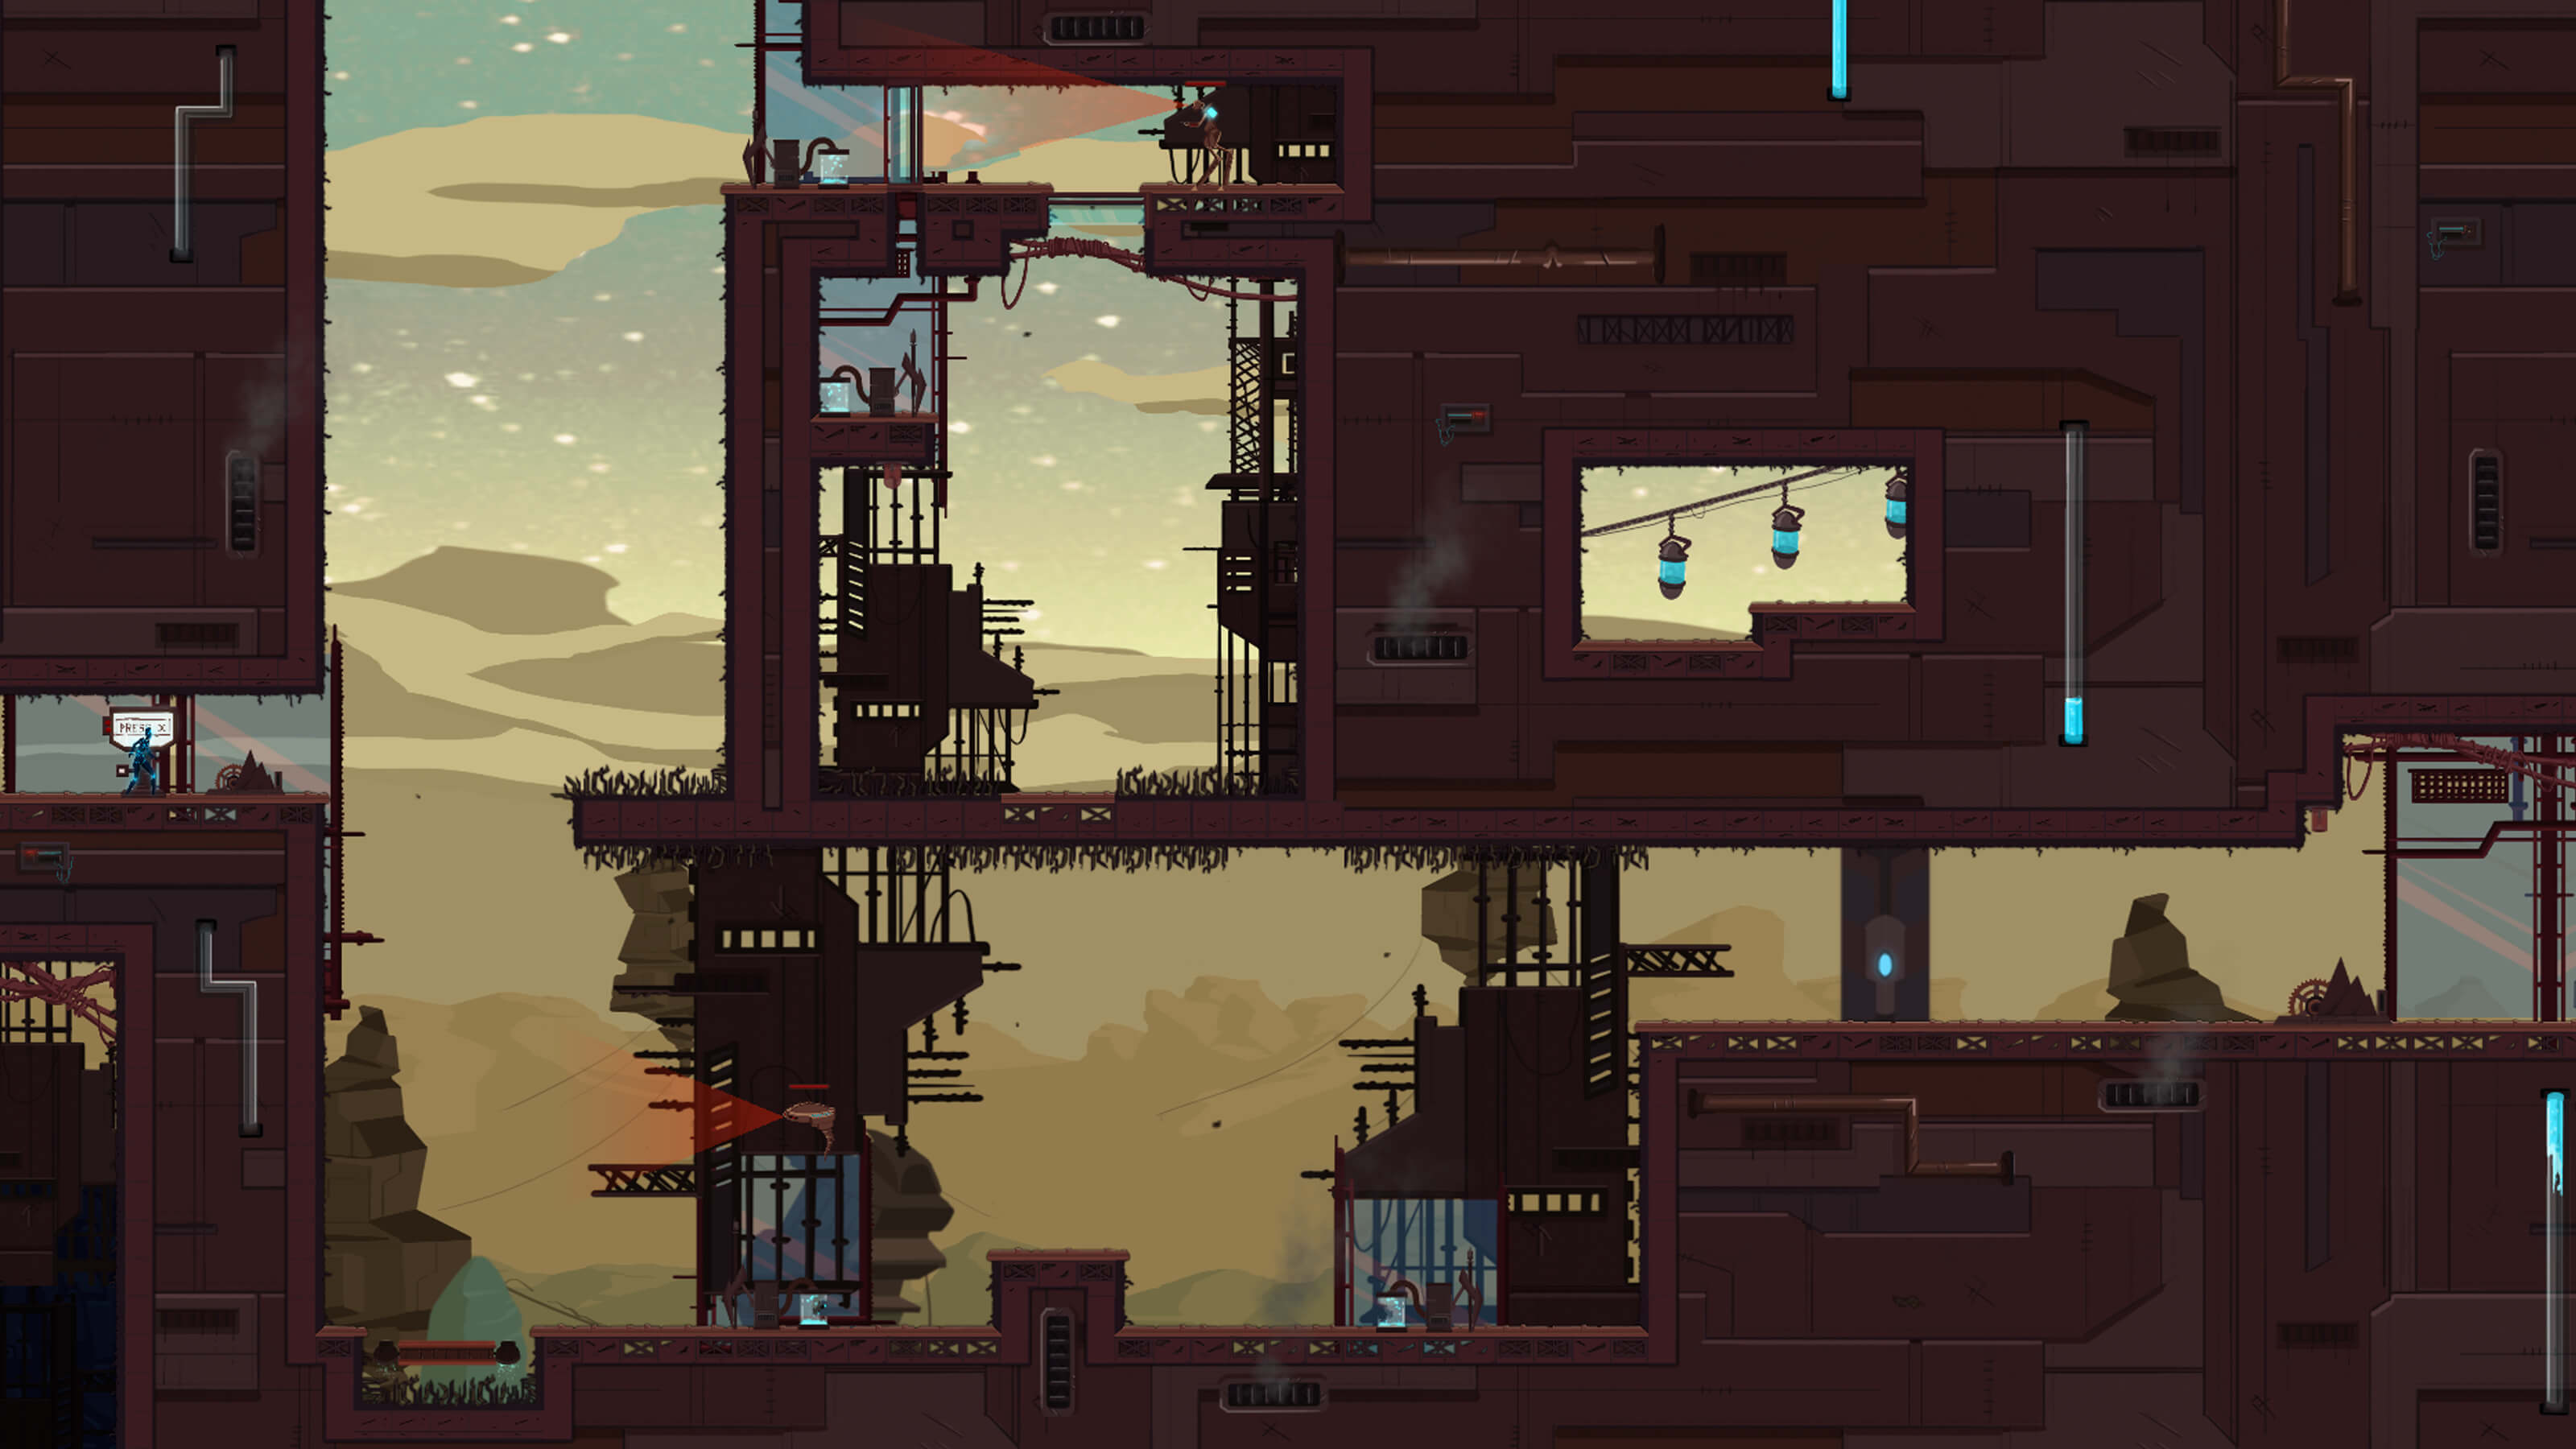 A zoomed-out view of a futuristic industrial level, full of steam vents, pipes and scaffolding